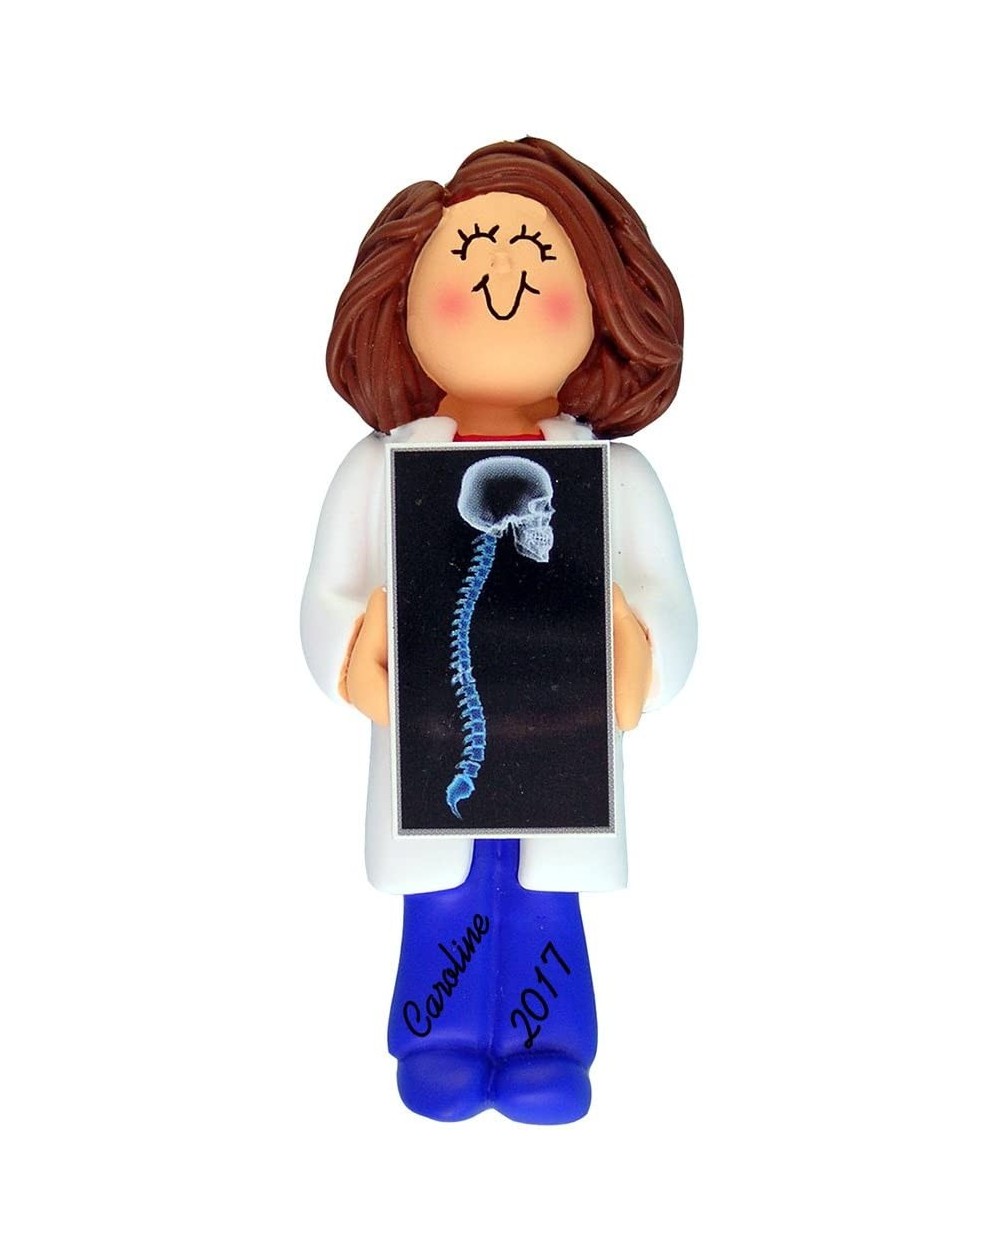 Ornaments Chiropractor/X-Ray Tech Personalized Christmas Ornament - Female - Brown Hair - 4" Tall - Handpainted Resin - Free ...